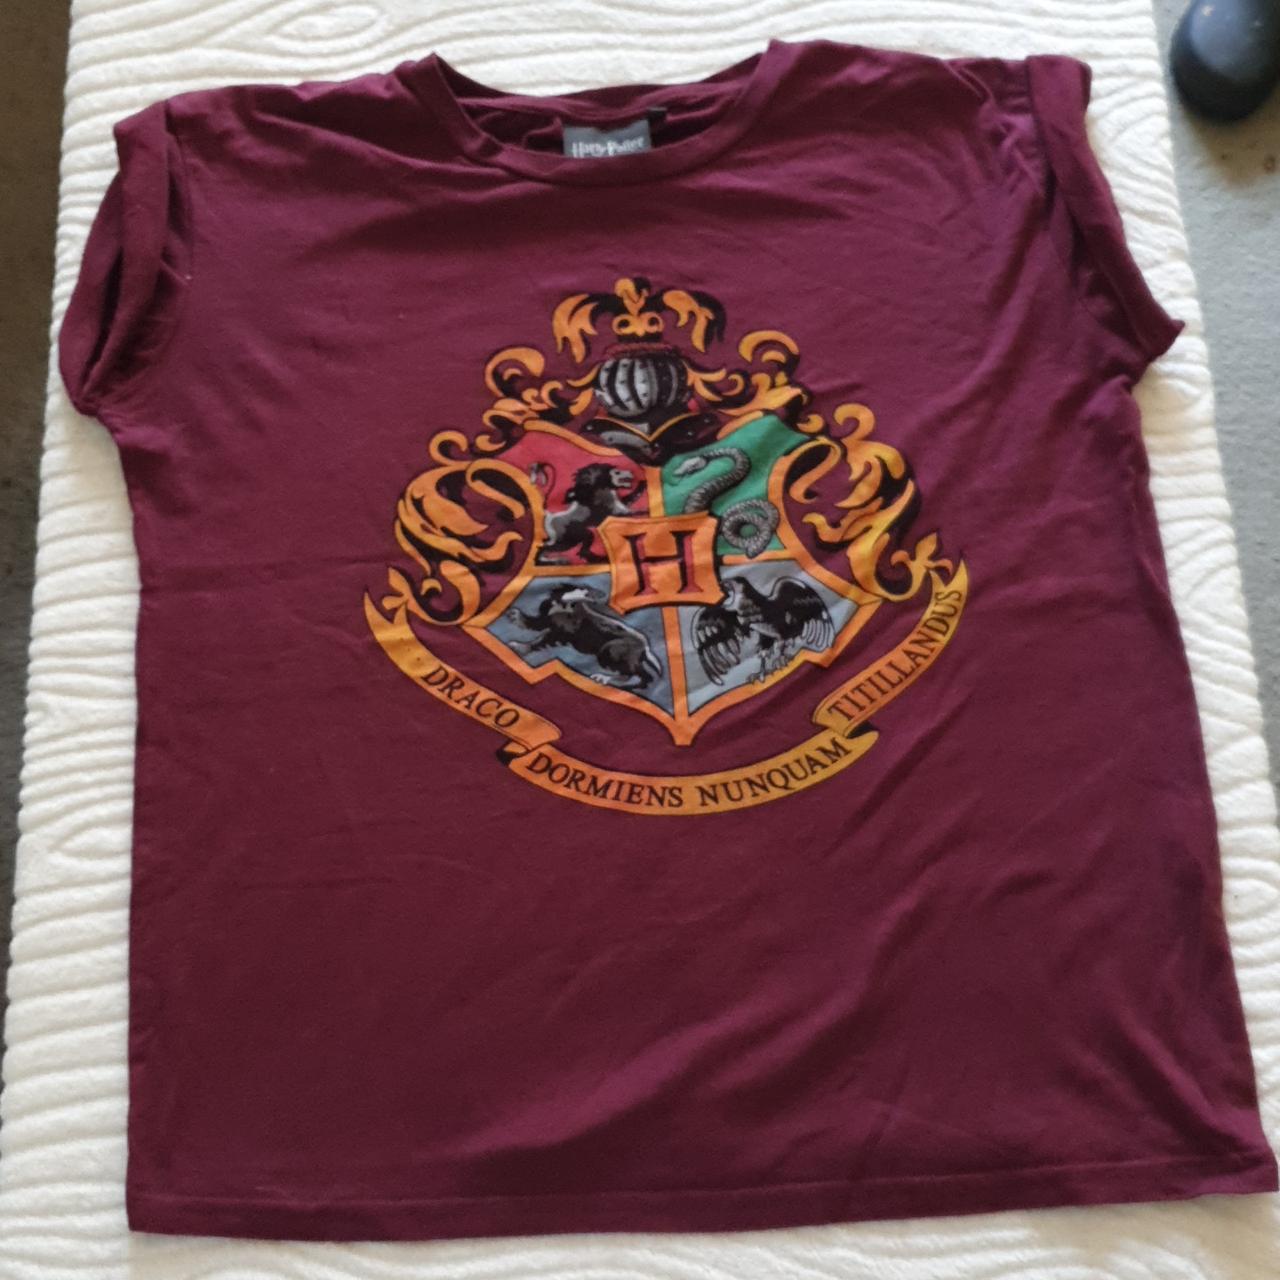 SALE!!! Harry Potter Women's Primark Clothing ALL ITEMS UNDER £15